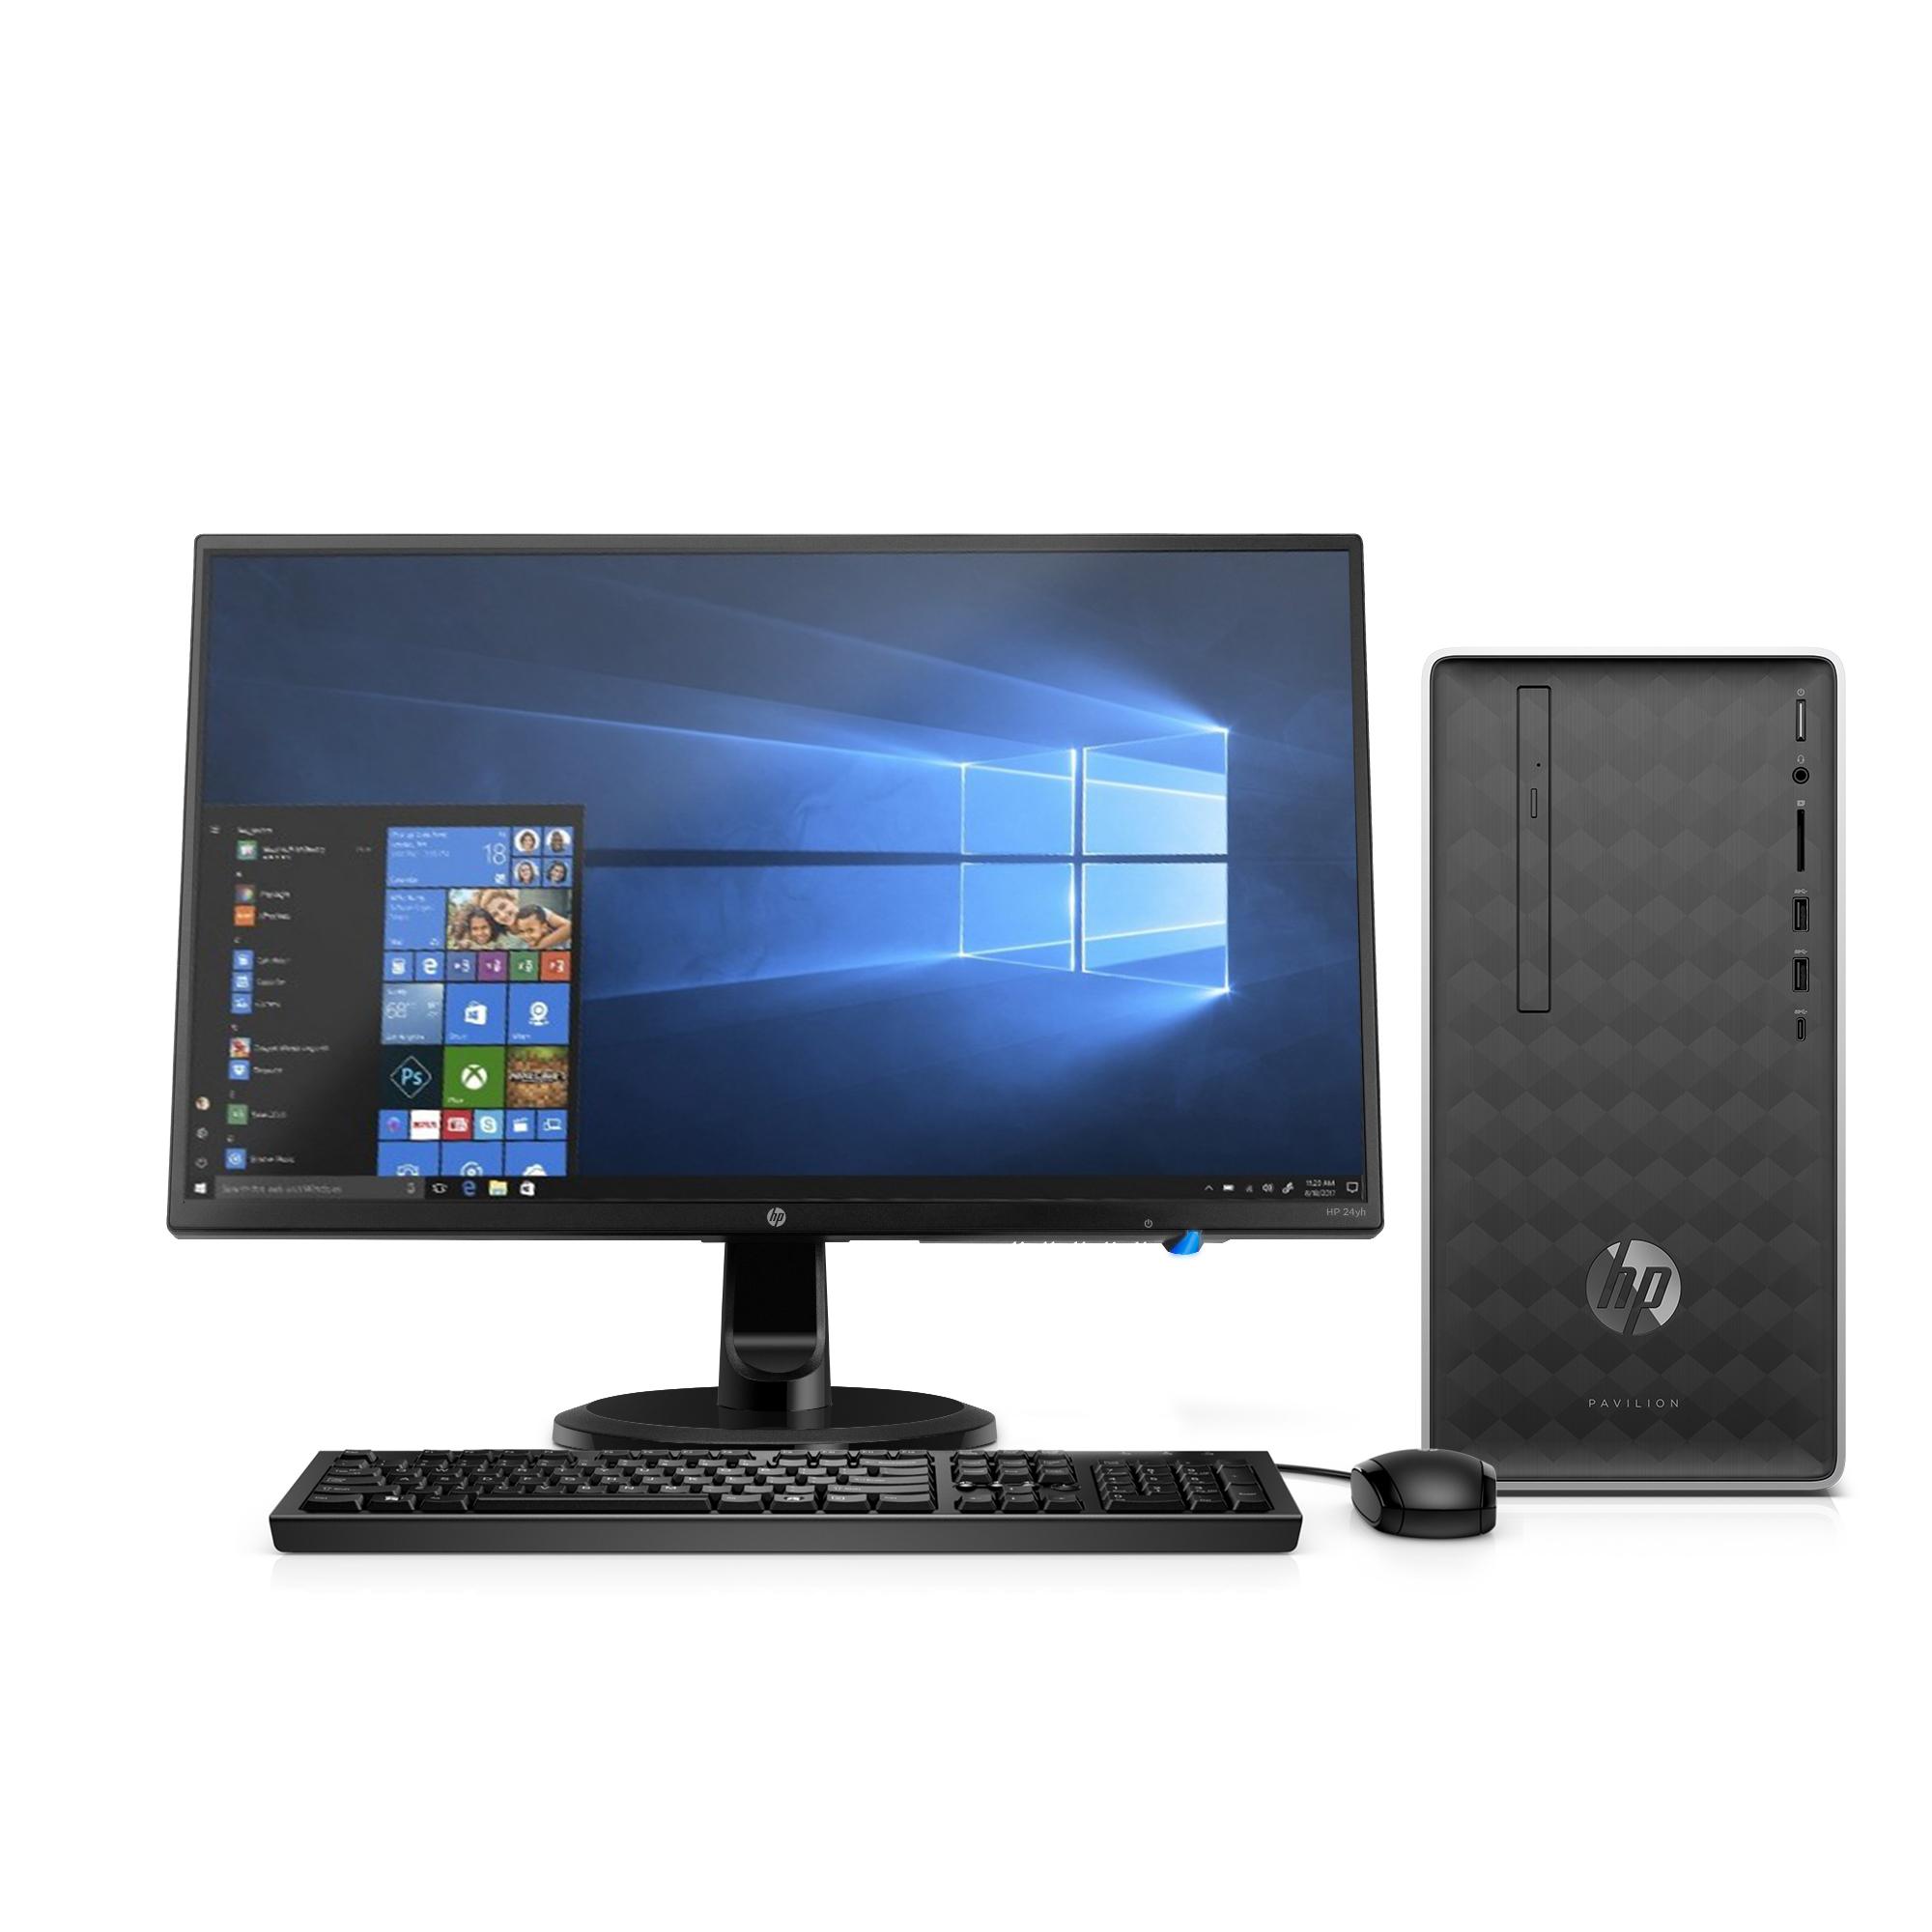 HP i3 8GB 1TB Desktop Computer with 23in HP Monitor for $314.10 Shipped